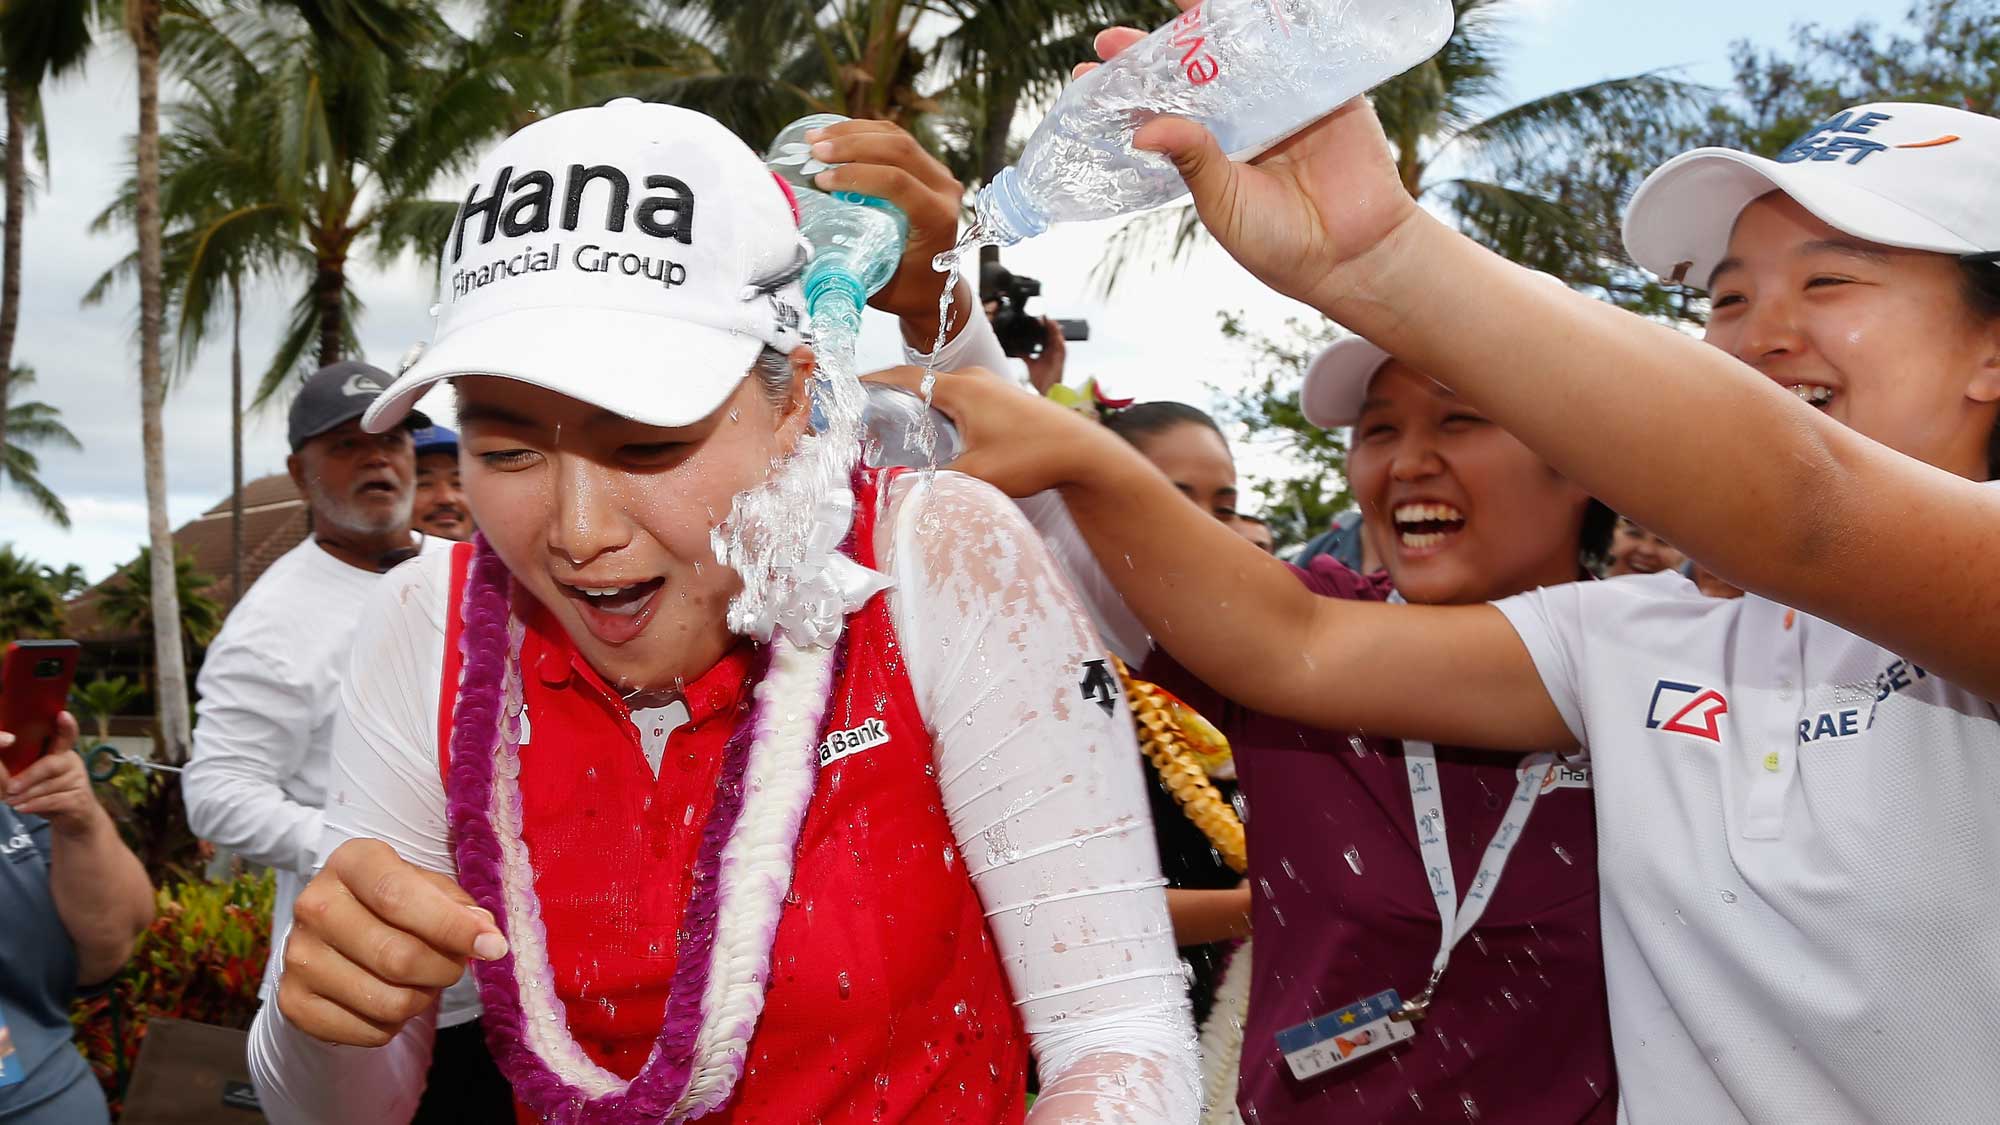 Minjee Lee (L) of Australia has water dumped on her by Haru Nomura (C) of Japan and Sei Young Kim (R) of South Korea after Minjee won the LPGA LOTTE Championship Presented By Hershey